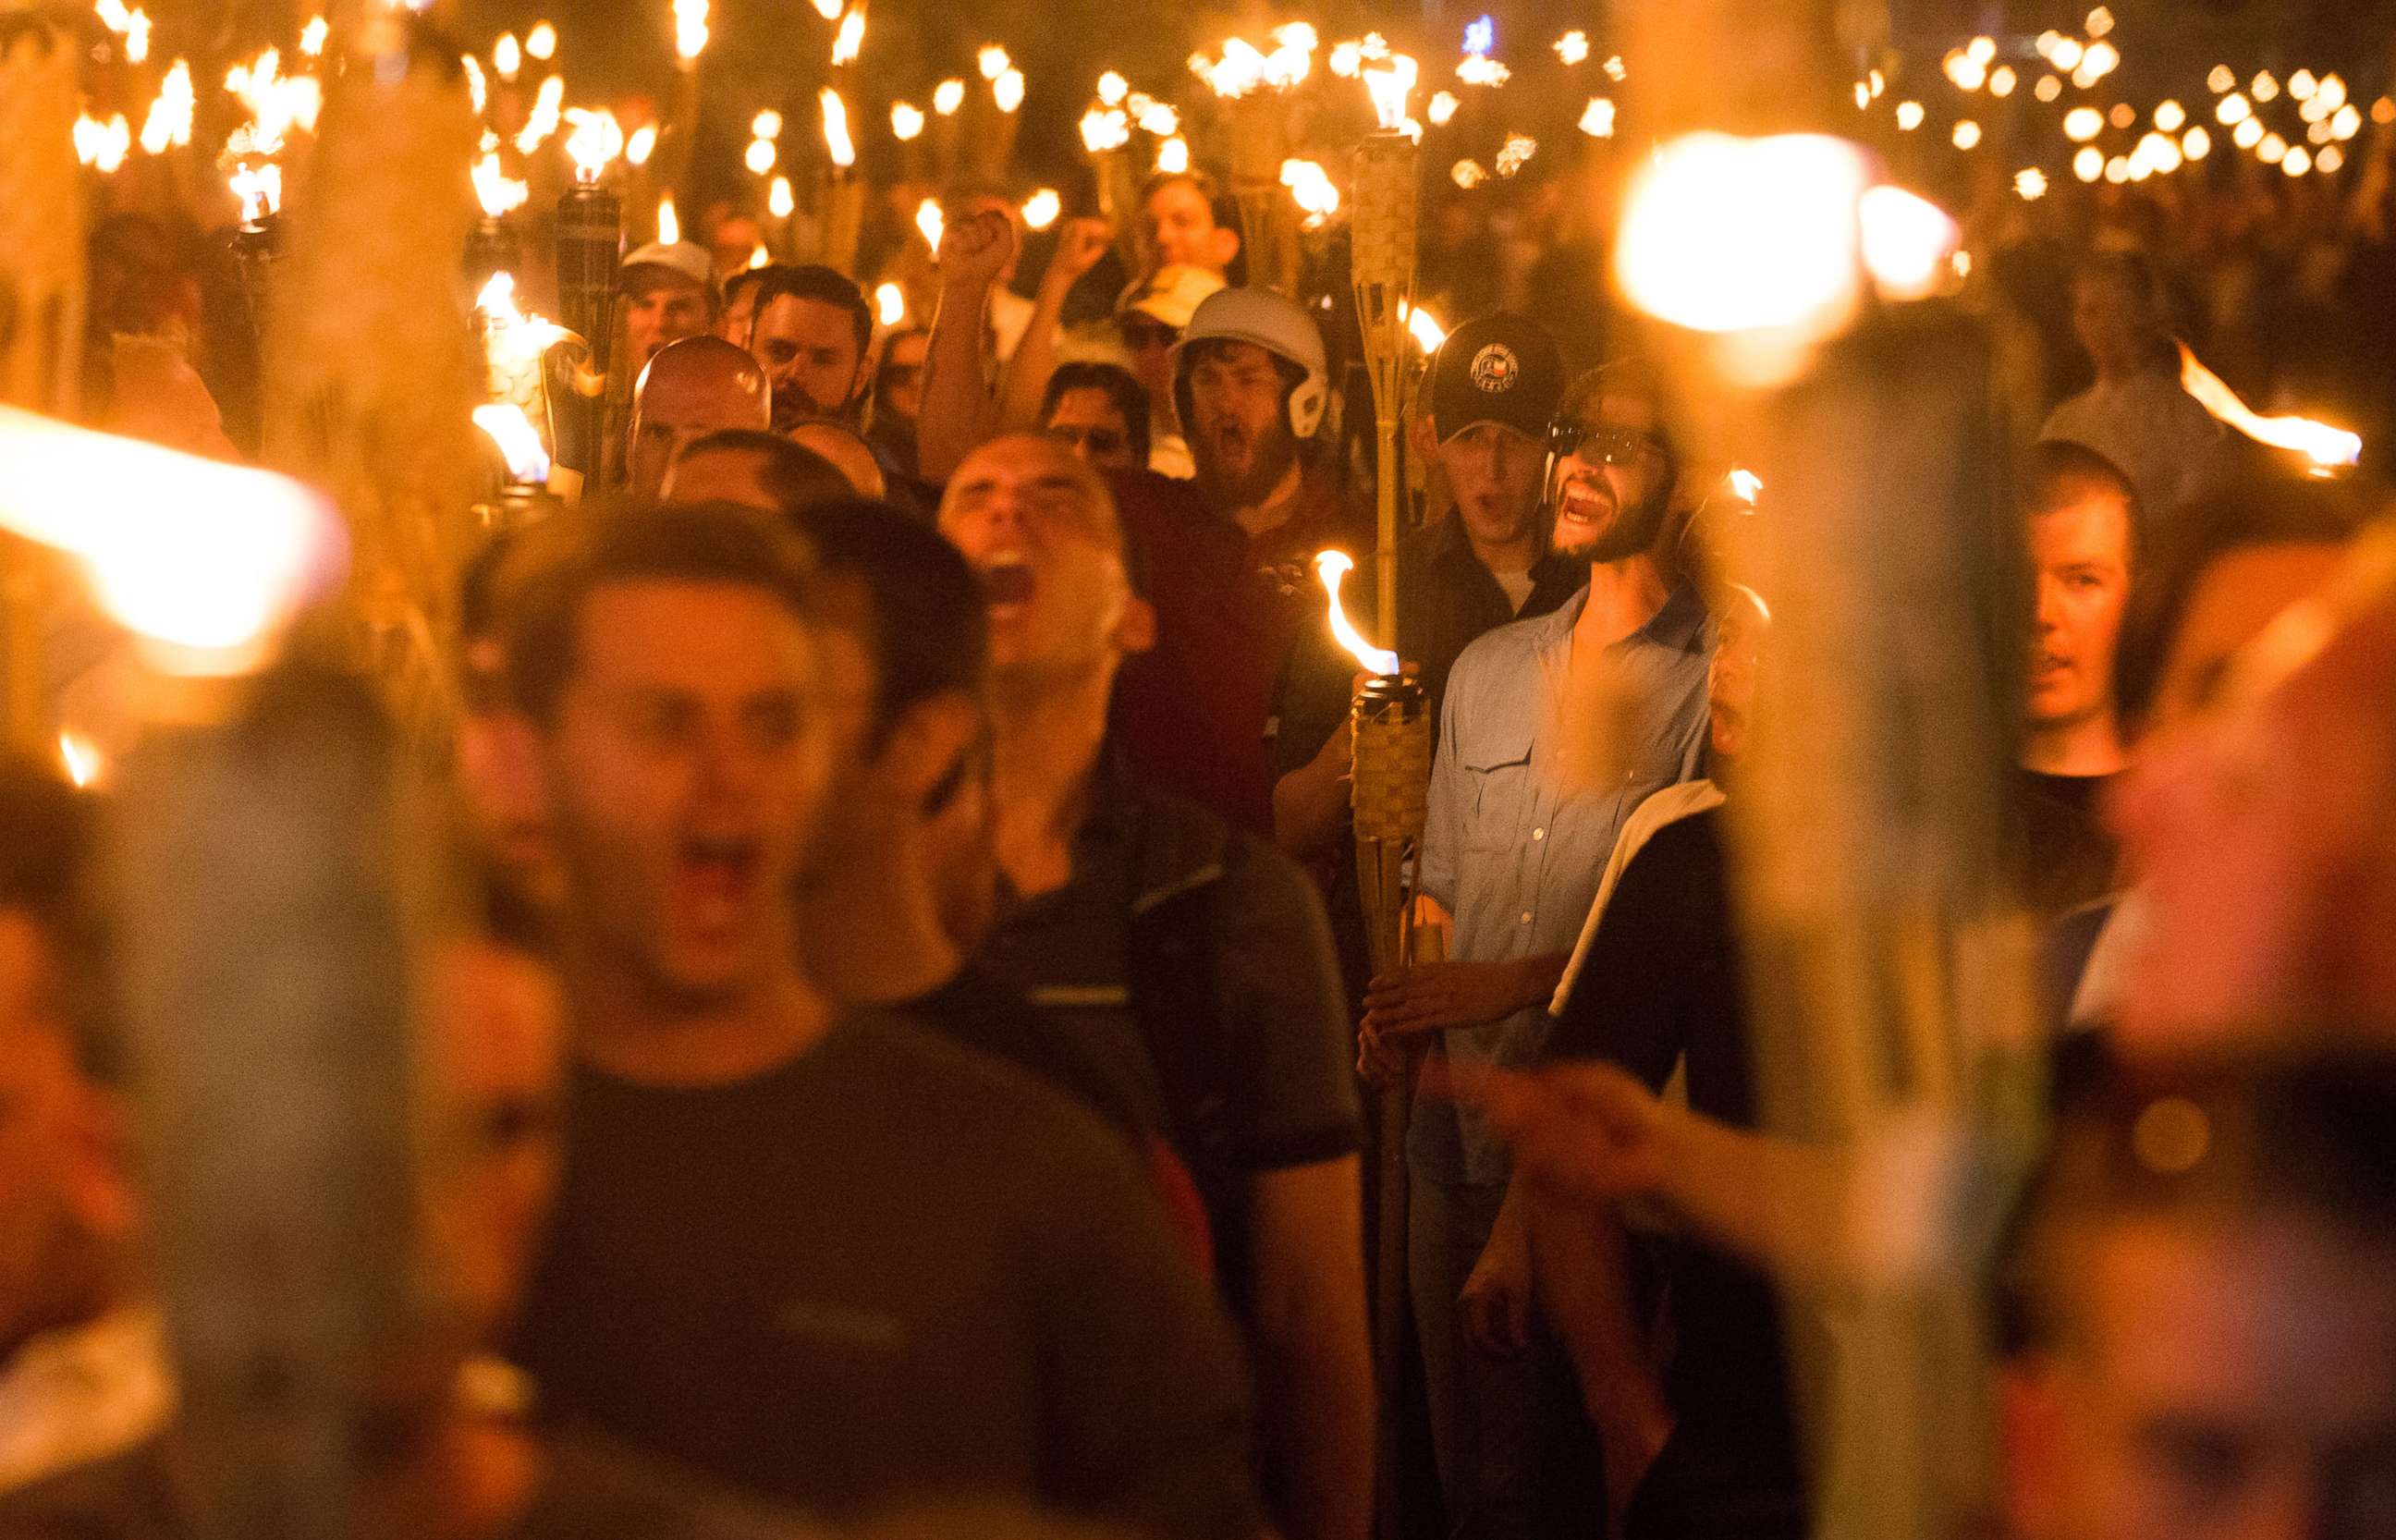 PHOTO: The night before the 'Unite the Right' rally in Charlottesville, Va., men march with tiki torches through the University of Virginia campus, Aug. 11, 2017.  